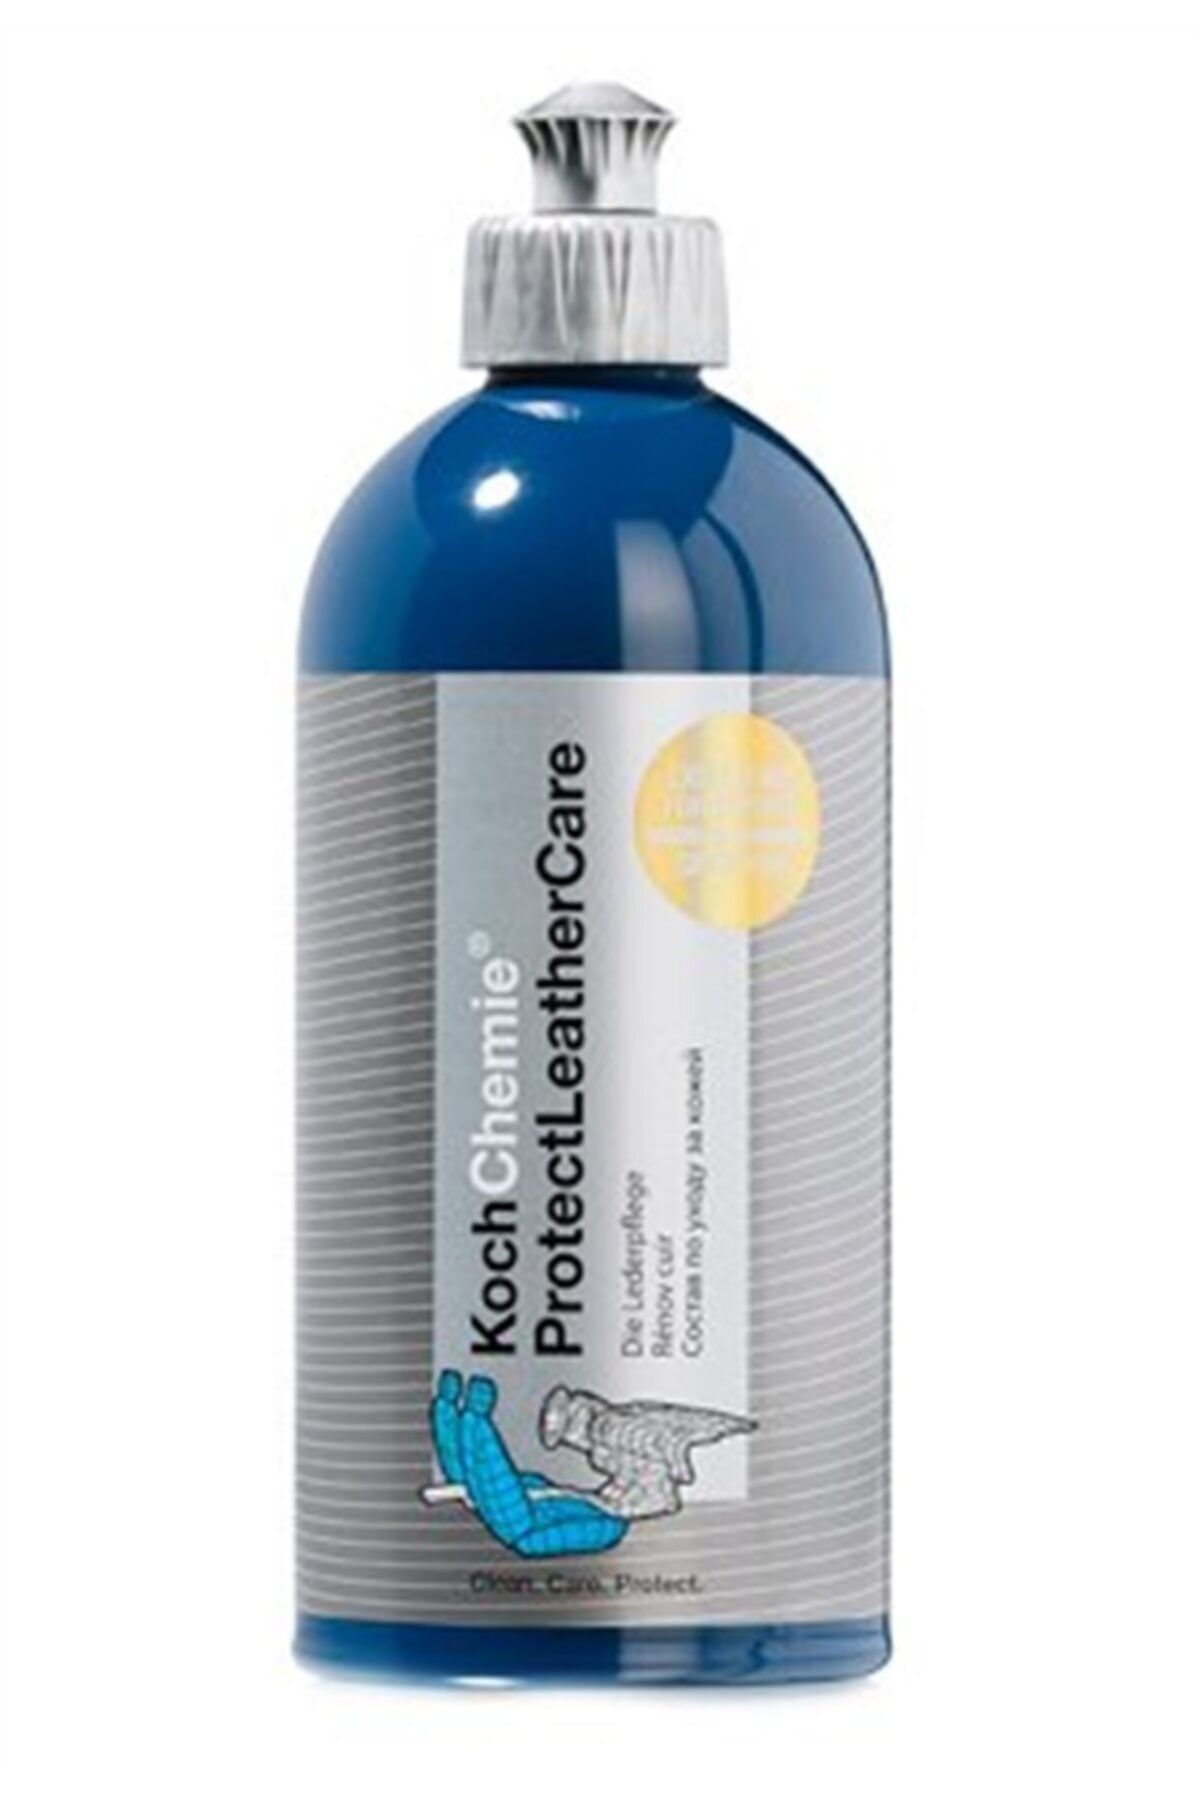 Koch Chemie Protect Leather Care 500 ml